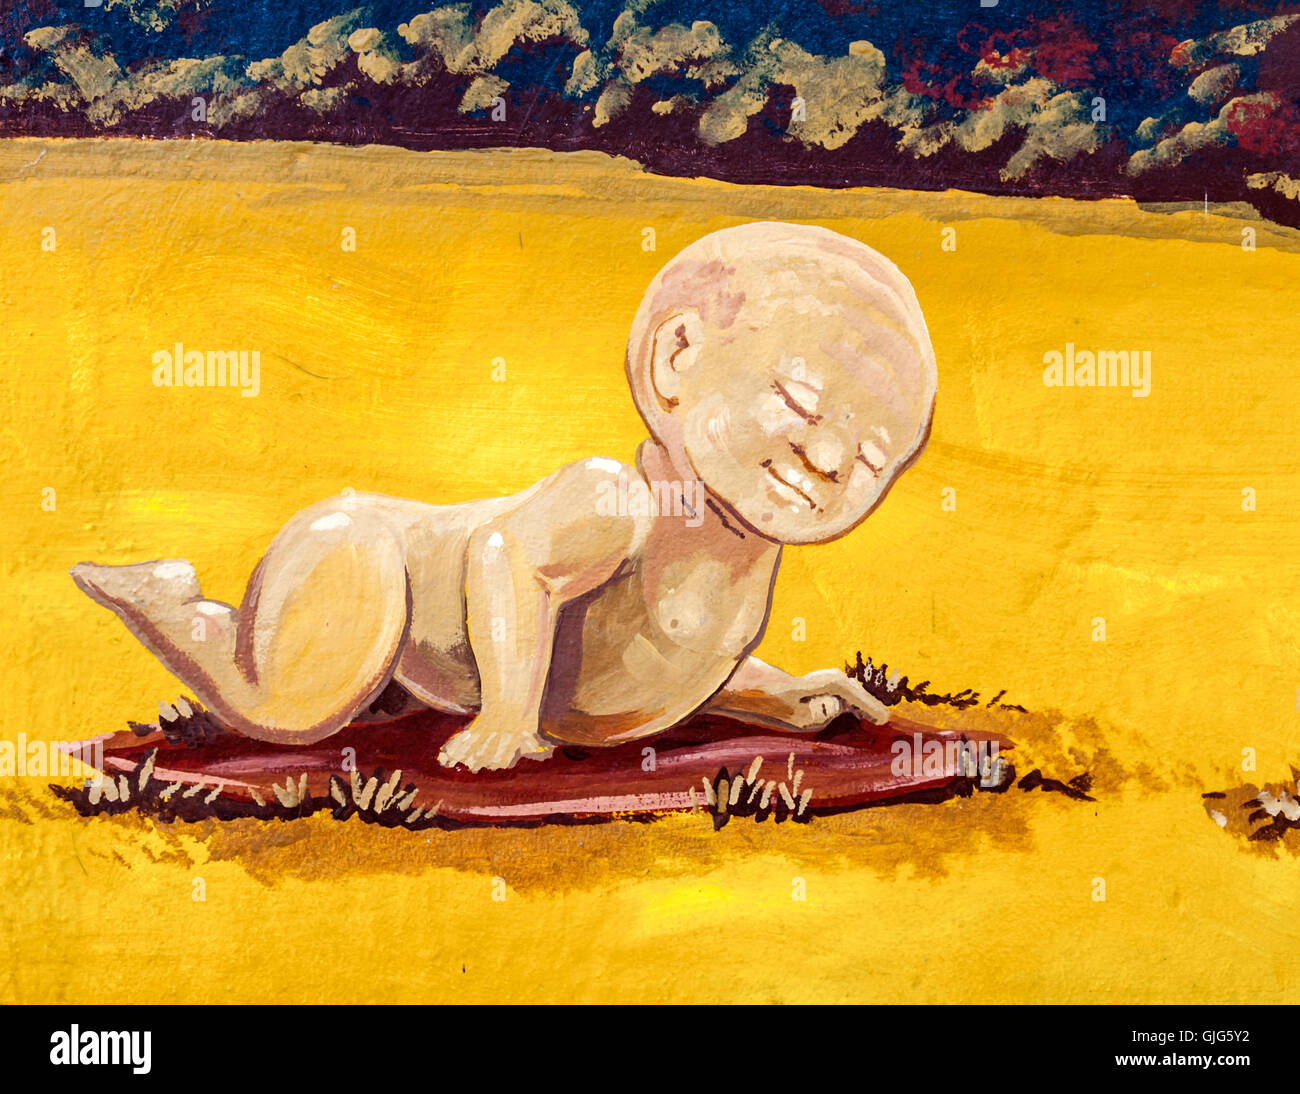 Detail of graffiti mural on the Berlin wall showing a baby, East Side Gallery, Friedrichshain, Berlin, Germany. Stock Photo